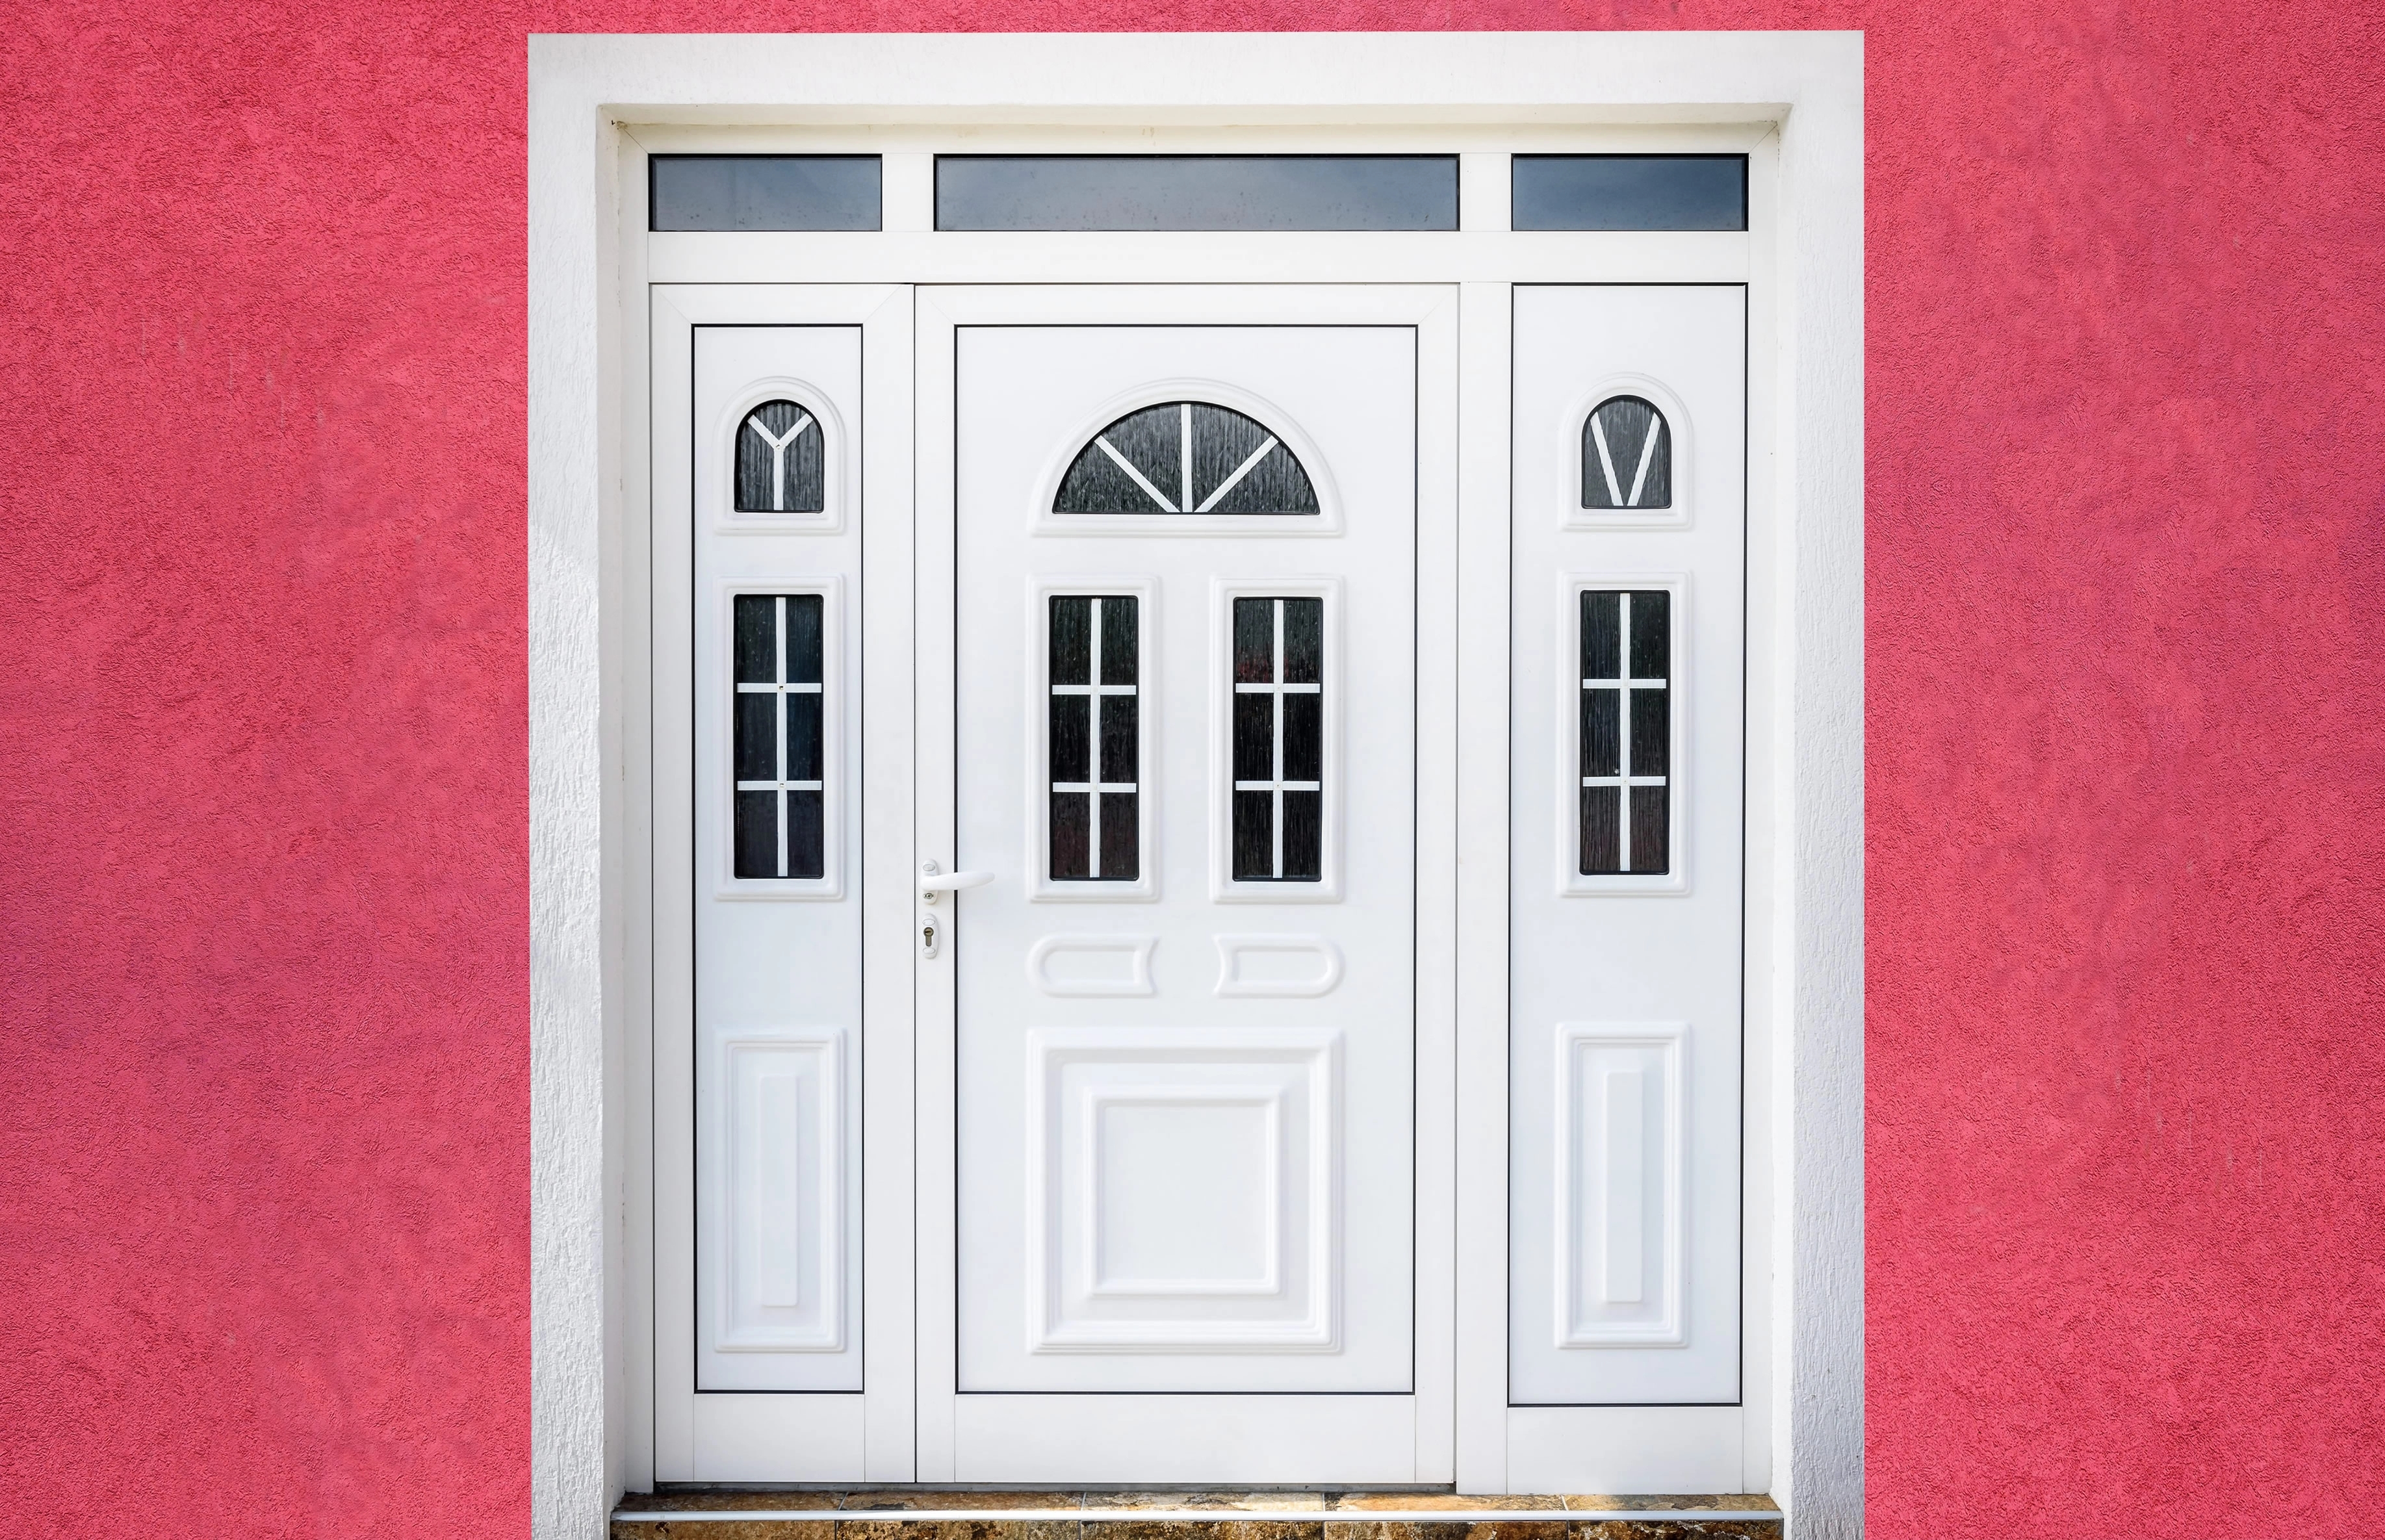 A uPVC Door in white with red painted house